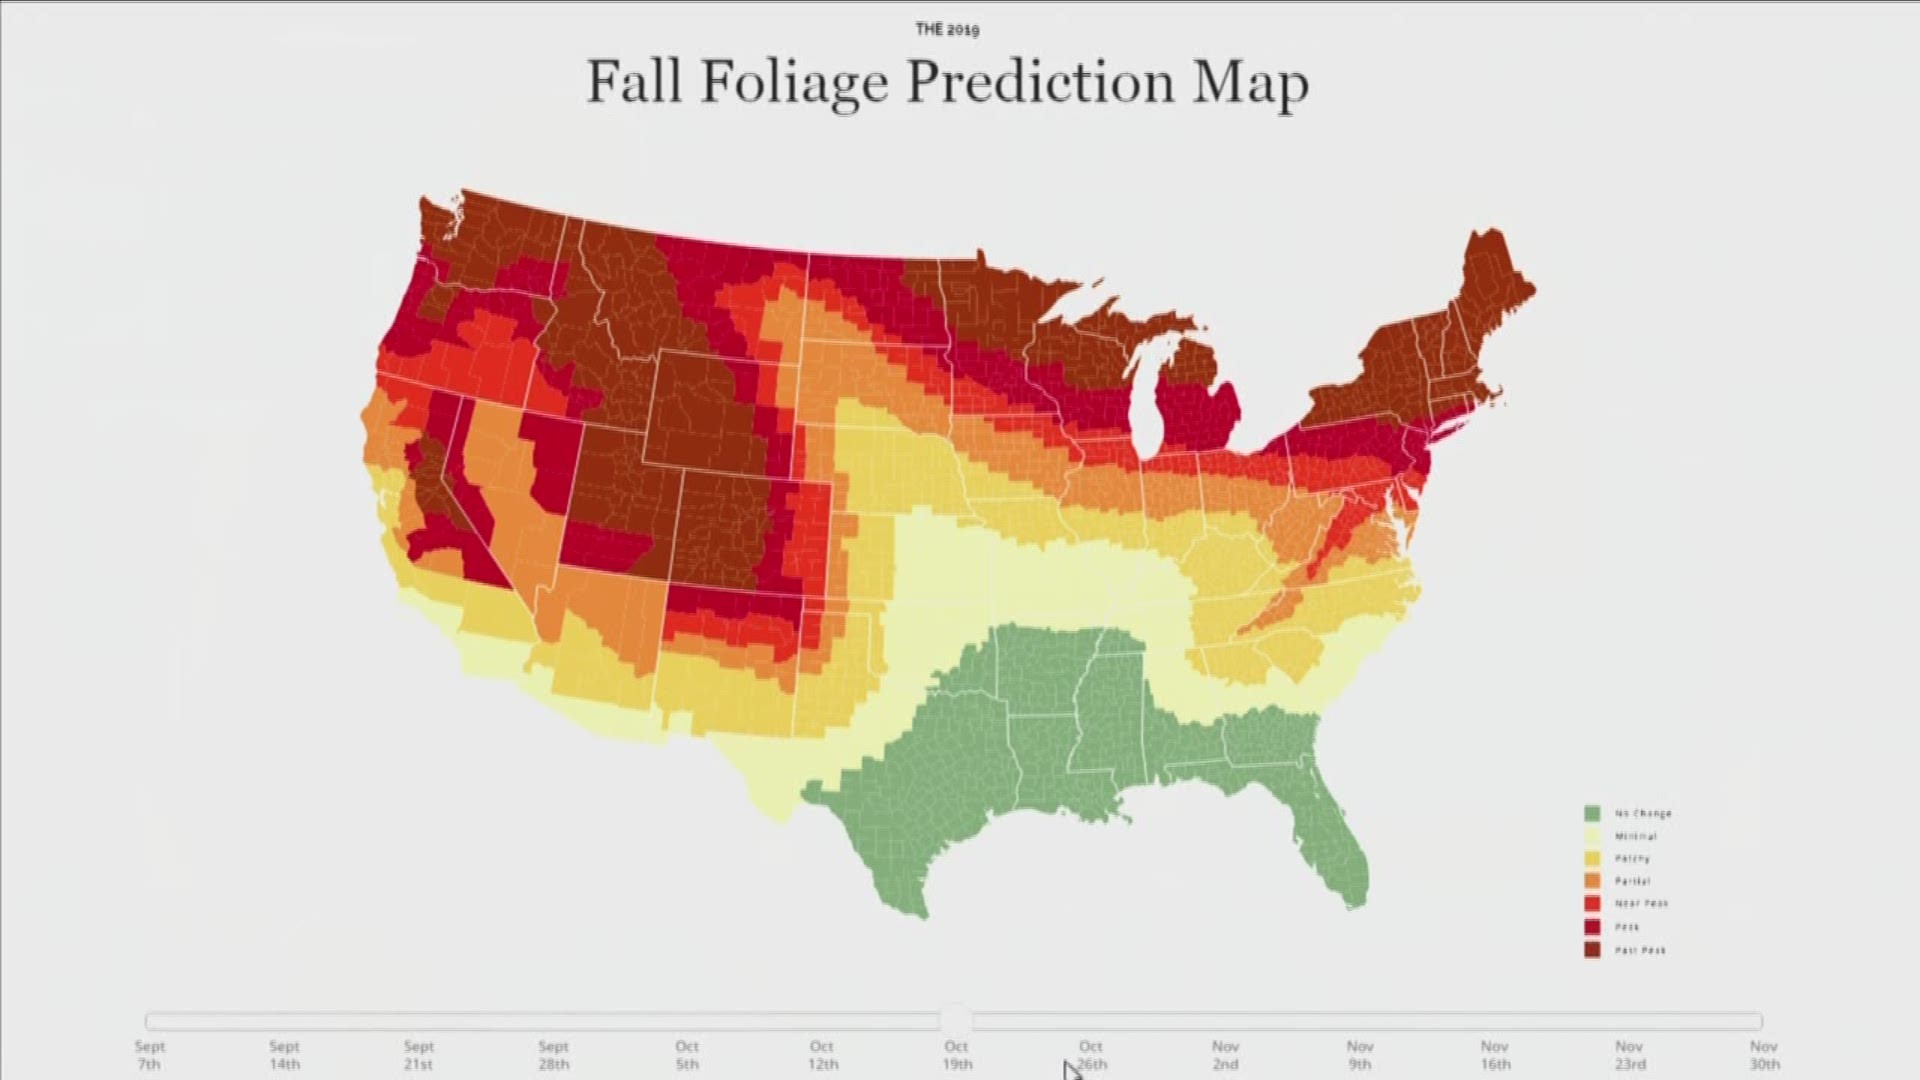 Fall foliage prediction map shows timing of leaf changes